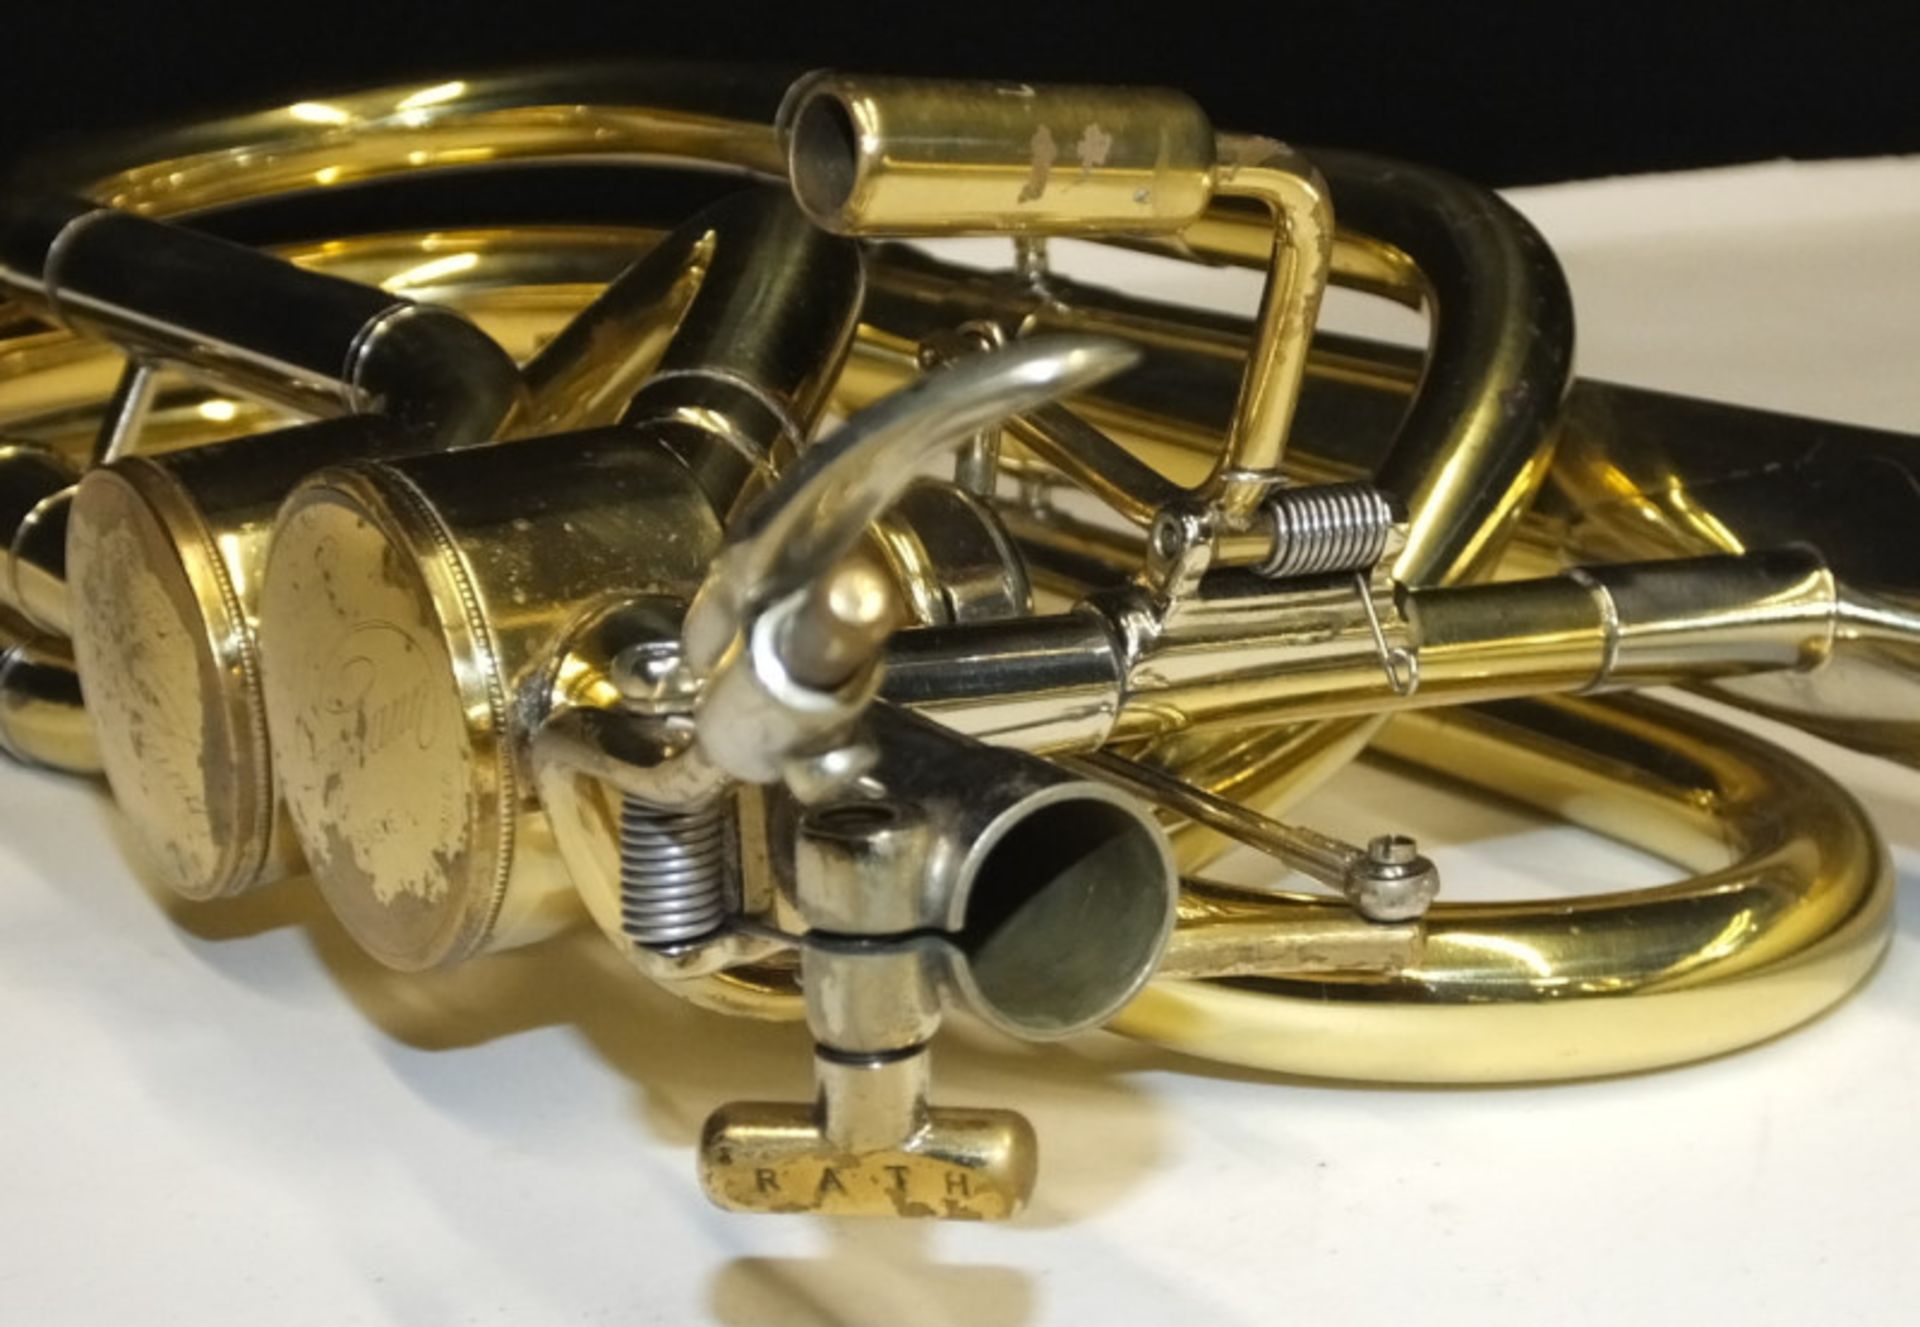 Rath R9 Trombone in Protec case - Serial No. R9 012 - Please check photos carefully for - Image 12 of 22